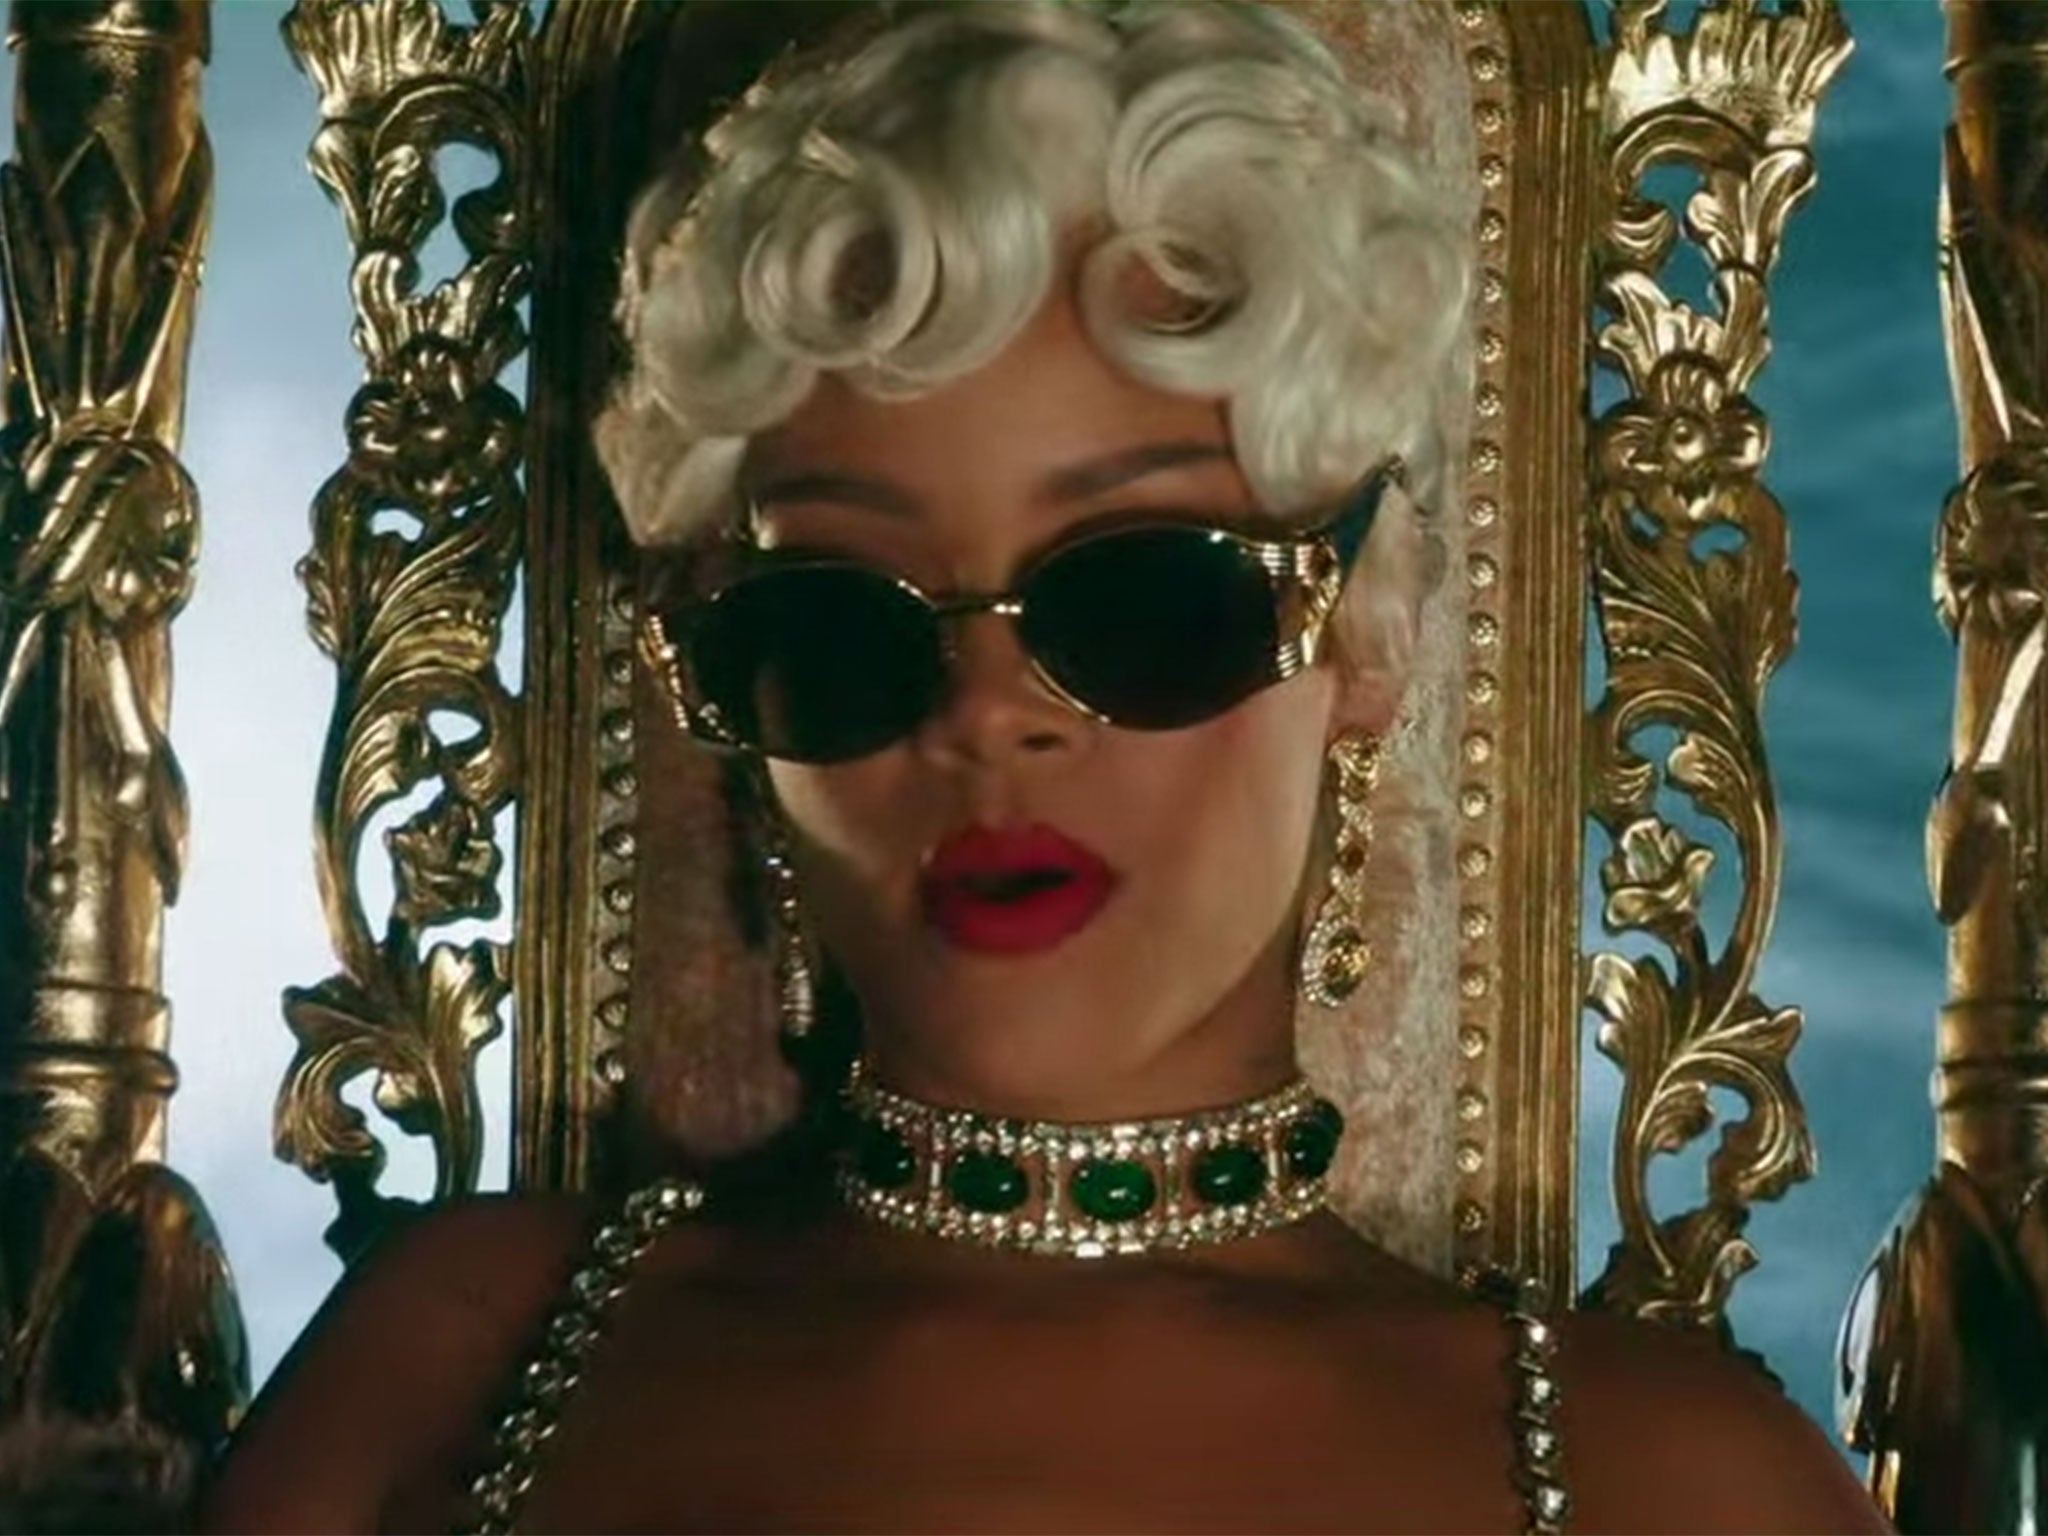 Rihanna – ‘Pour It Up’ In a video that features pole dancers and strippers, Rihanna dresses the part in a jewel-encrusted bikini and stiletto heels